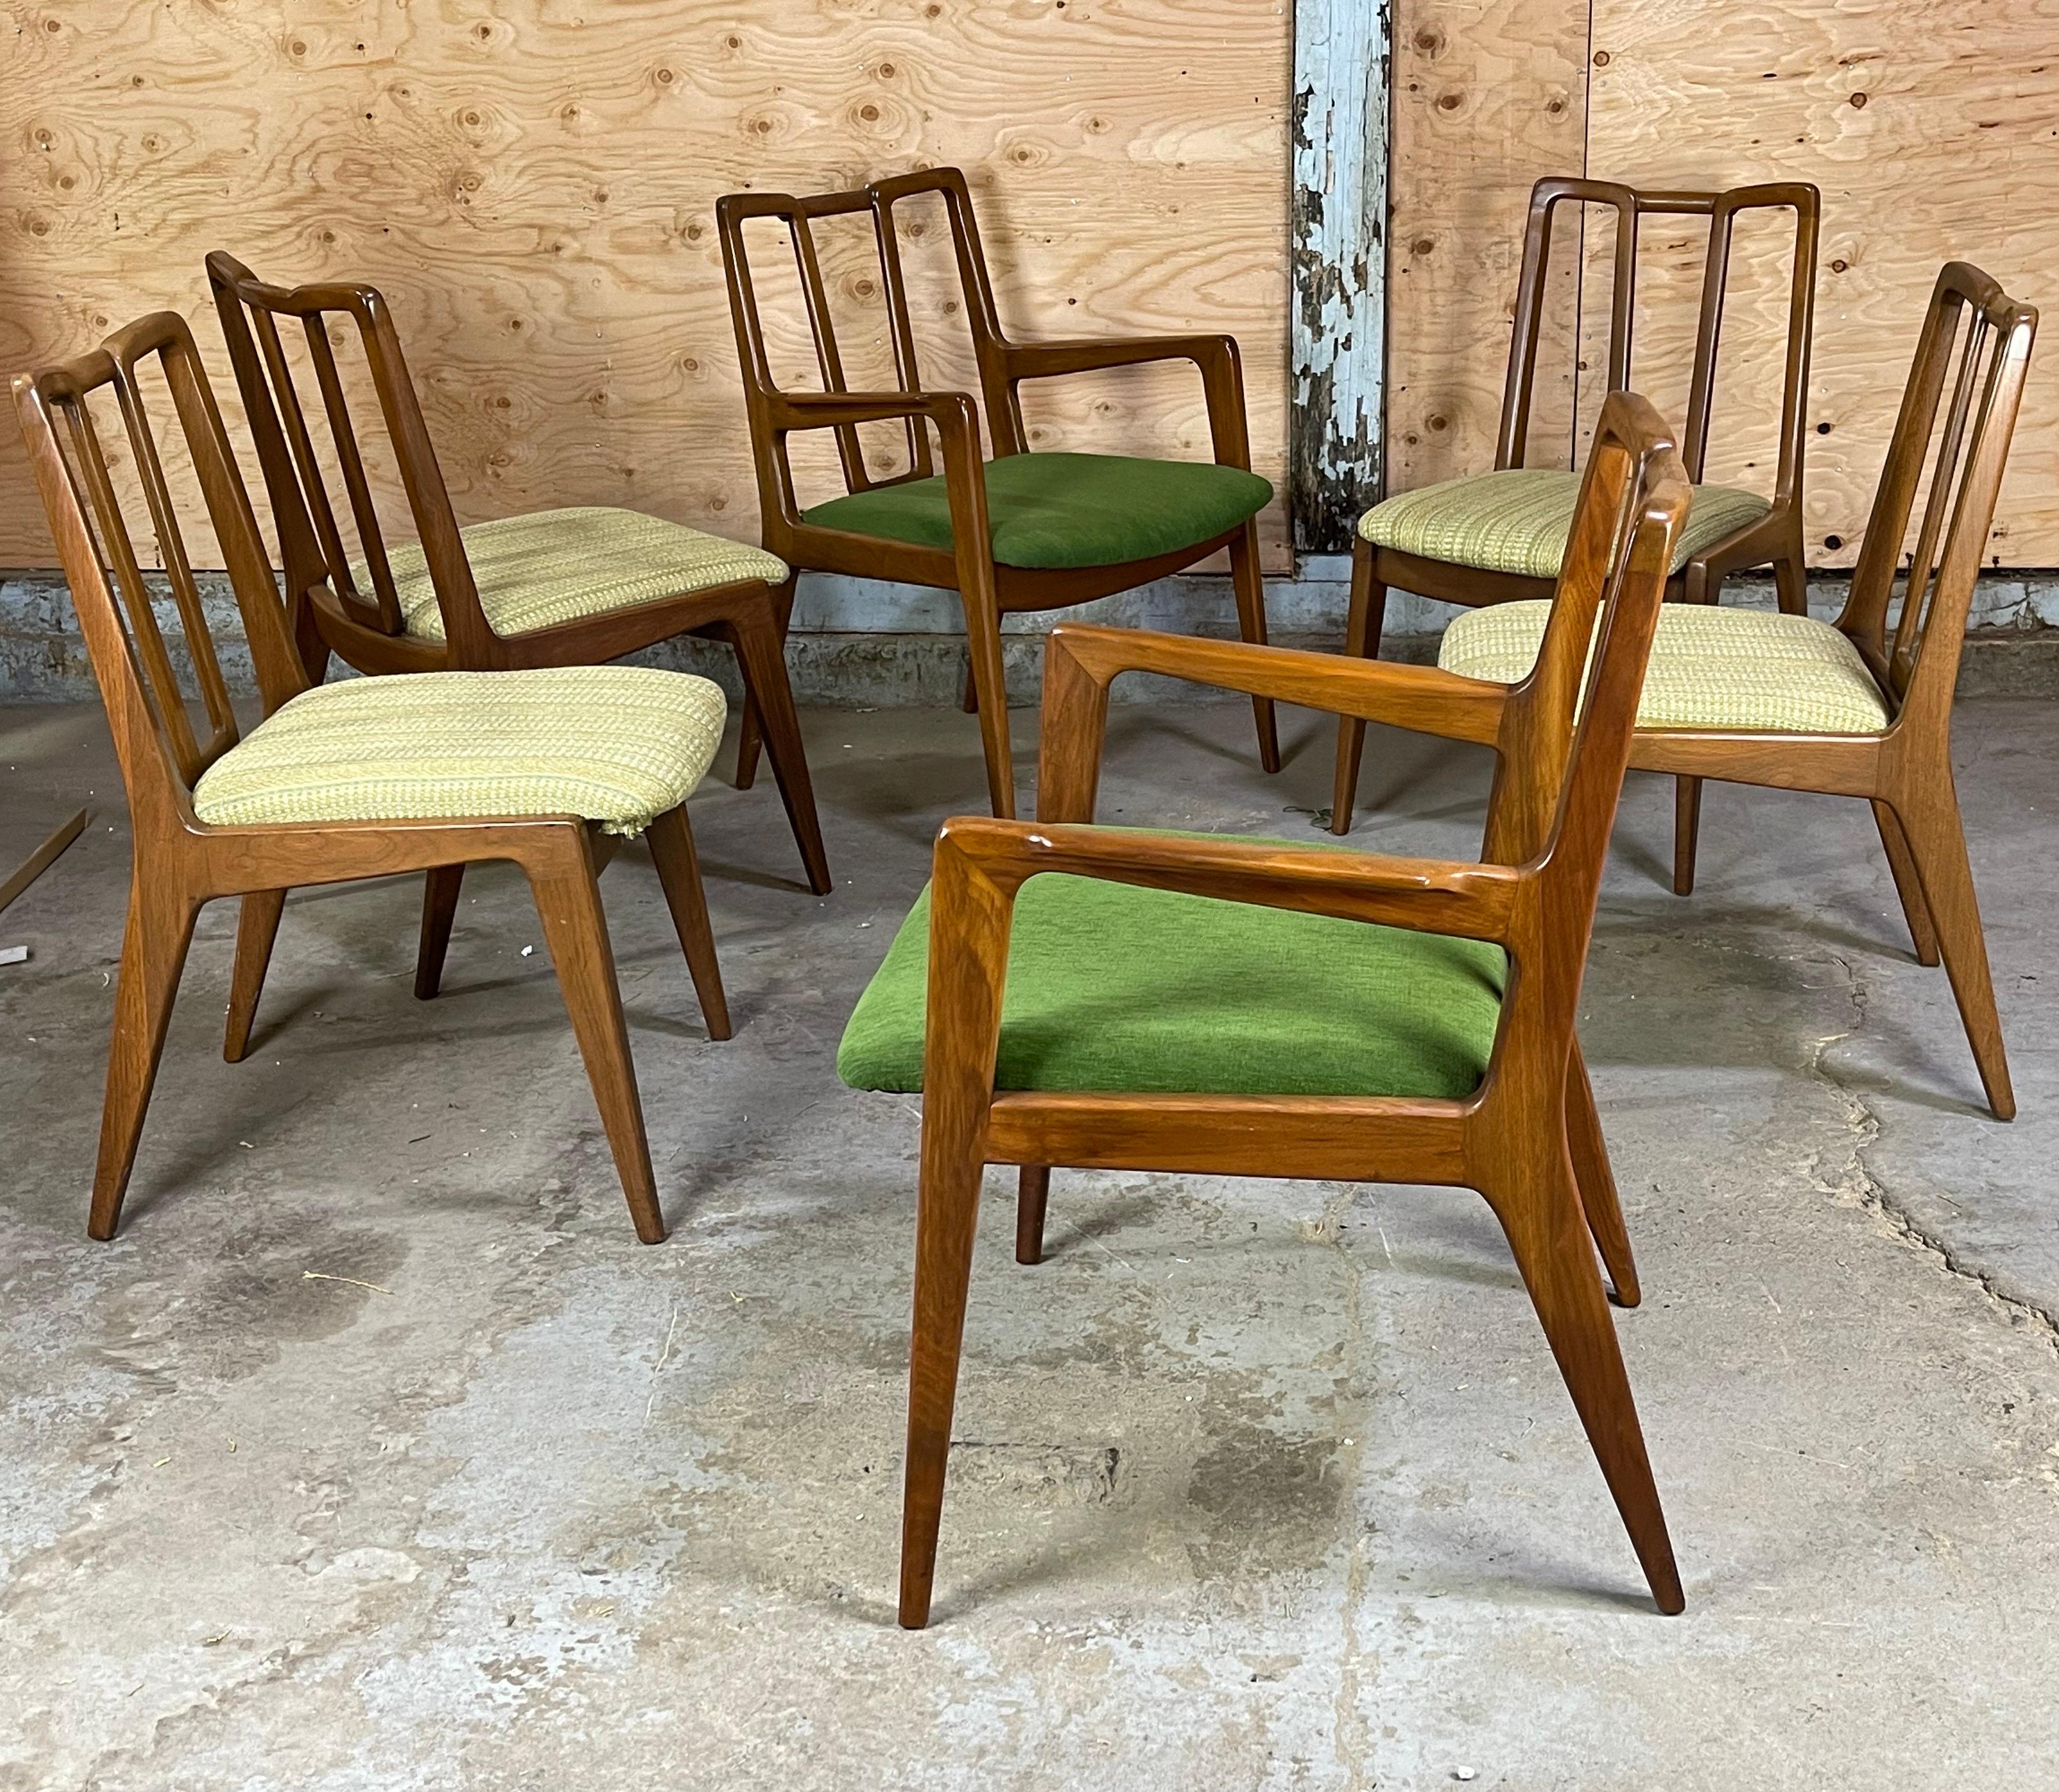 Lovely sculpted walnut Mid Century dining chairs after Ico Parisi or James Mont. Original condition. Reupholstered seat cushions in emerald green for the Capt chairs and a striped vintage tweed in an array of greens on the side chairs. Wear mostly